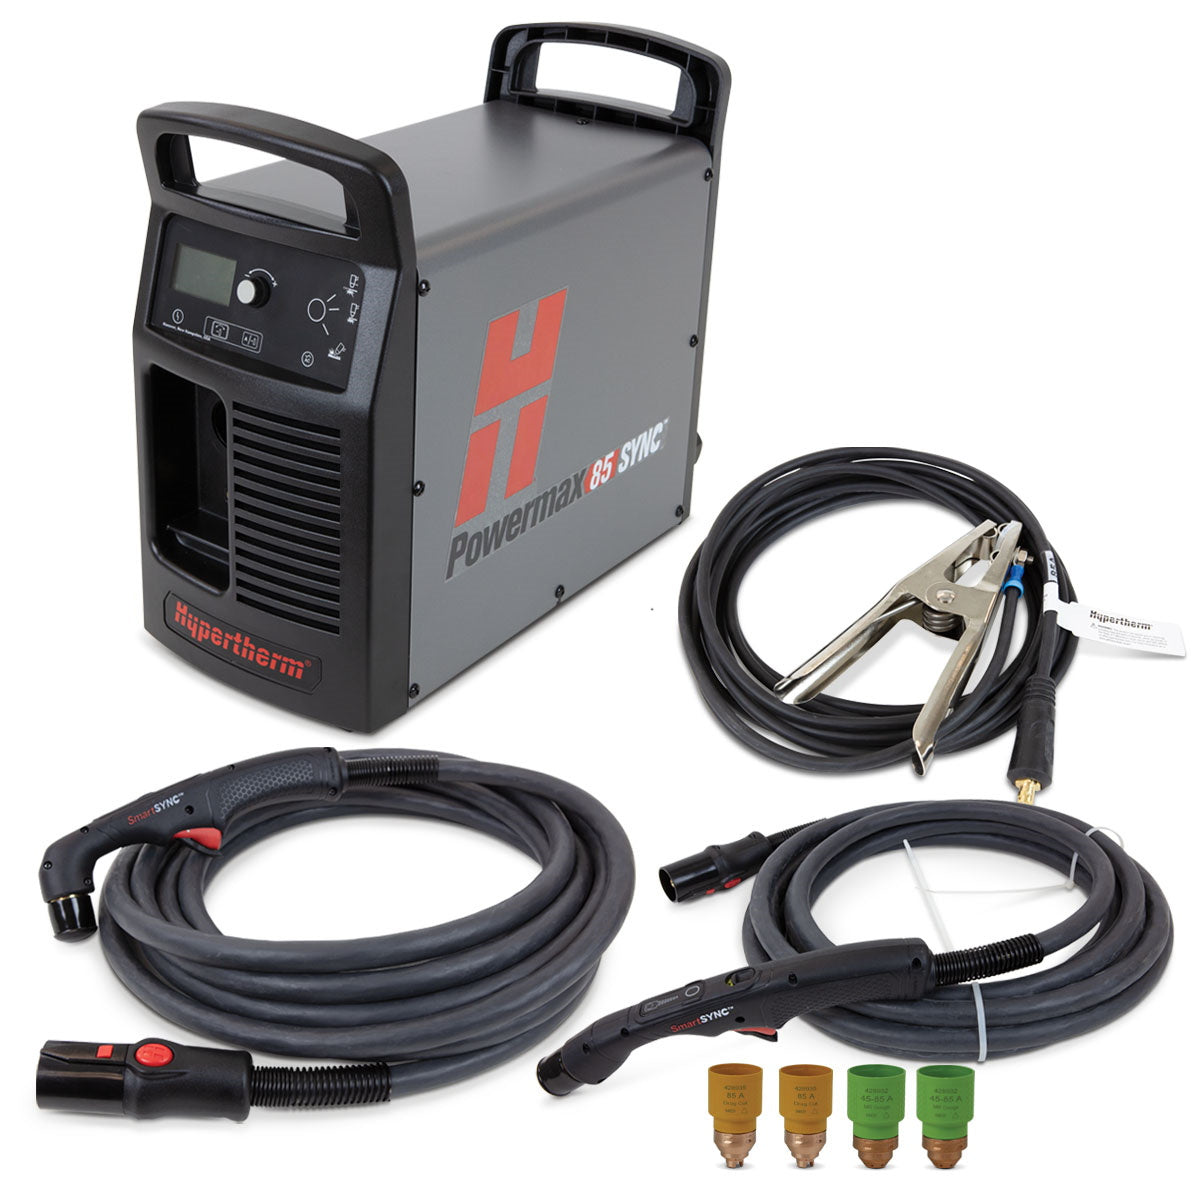 Hypertherm Powermax 85 Sync Plasma Cutter w/25ft 75° and 15° Hand Torch (087187)